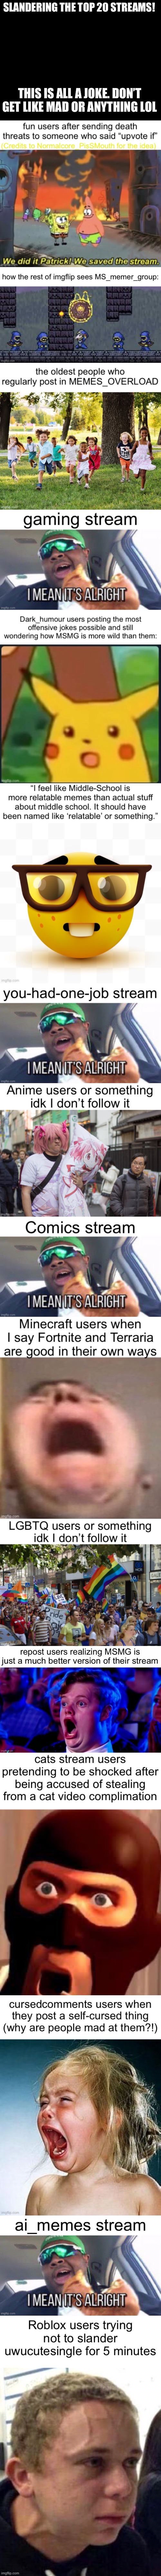 hehe | SLANDERING THE TOP 20 STREAMS! THIS IS ALL A JOKE. DON’T GET LIKE MAD OR ANYTHING LOL | image tagged in slander,memes,funny,dont get mad lol,i forgor,front page plz | made w/ Imgflip meme maker